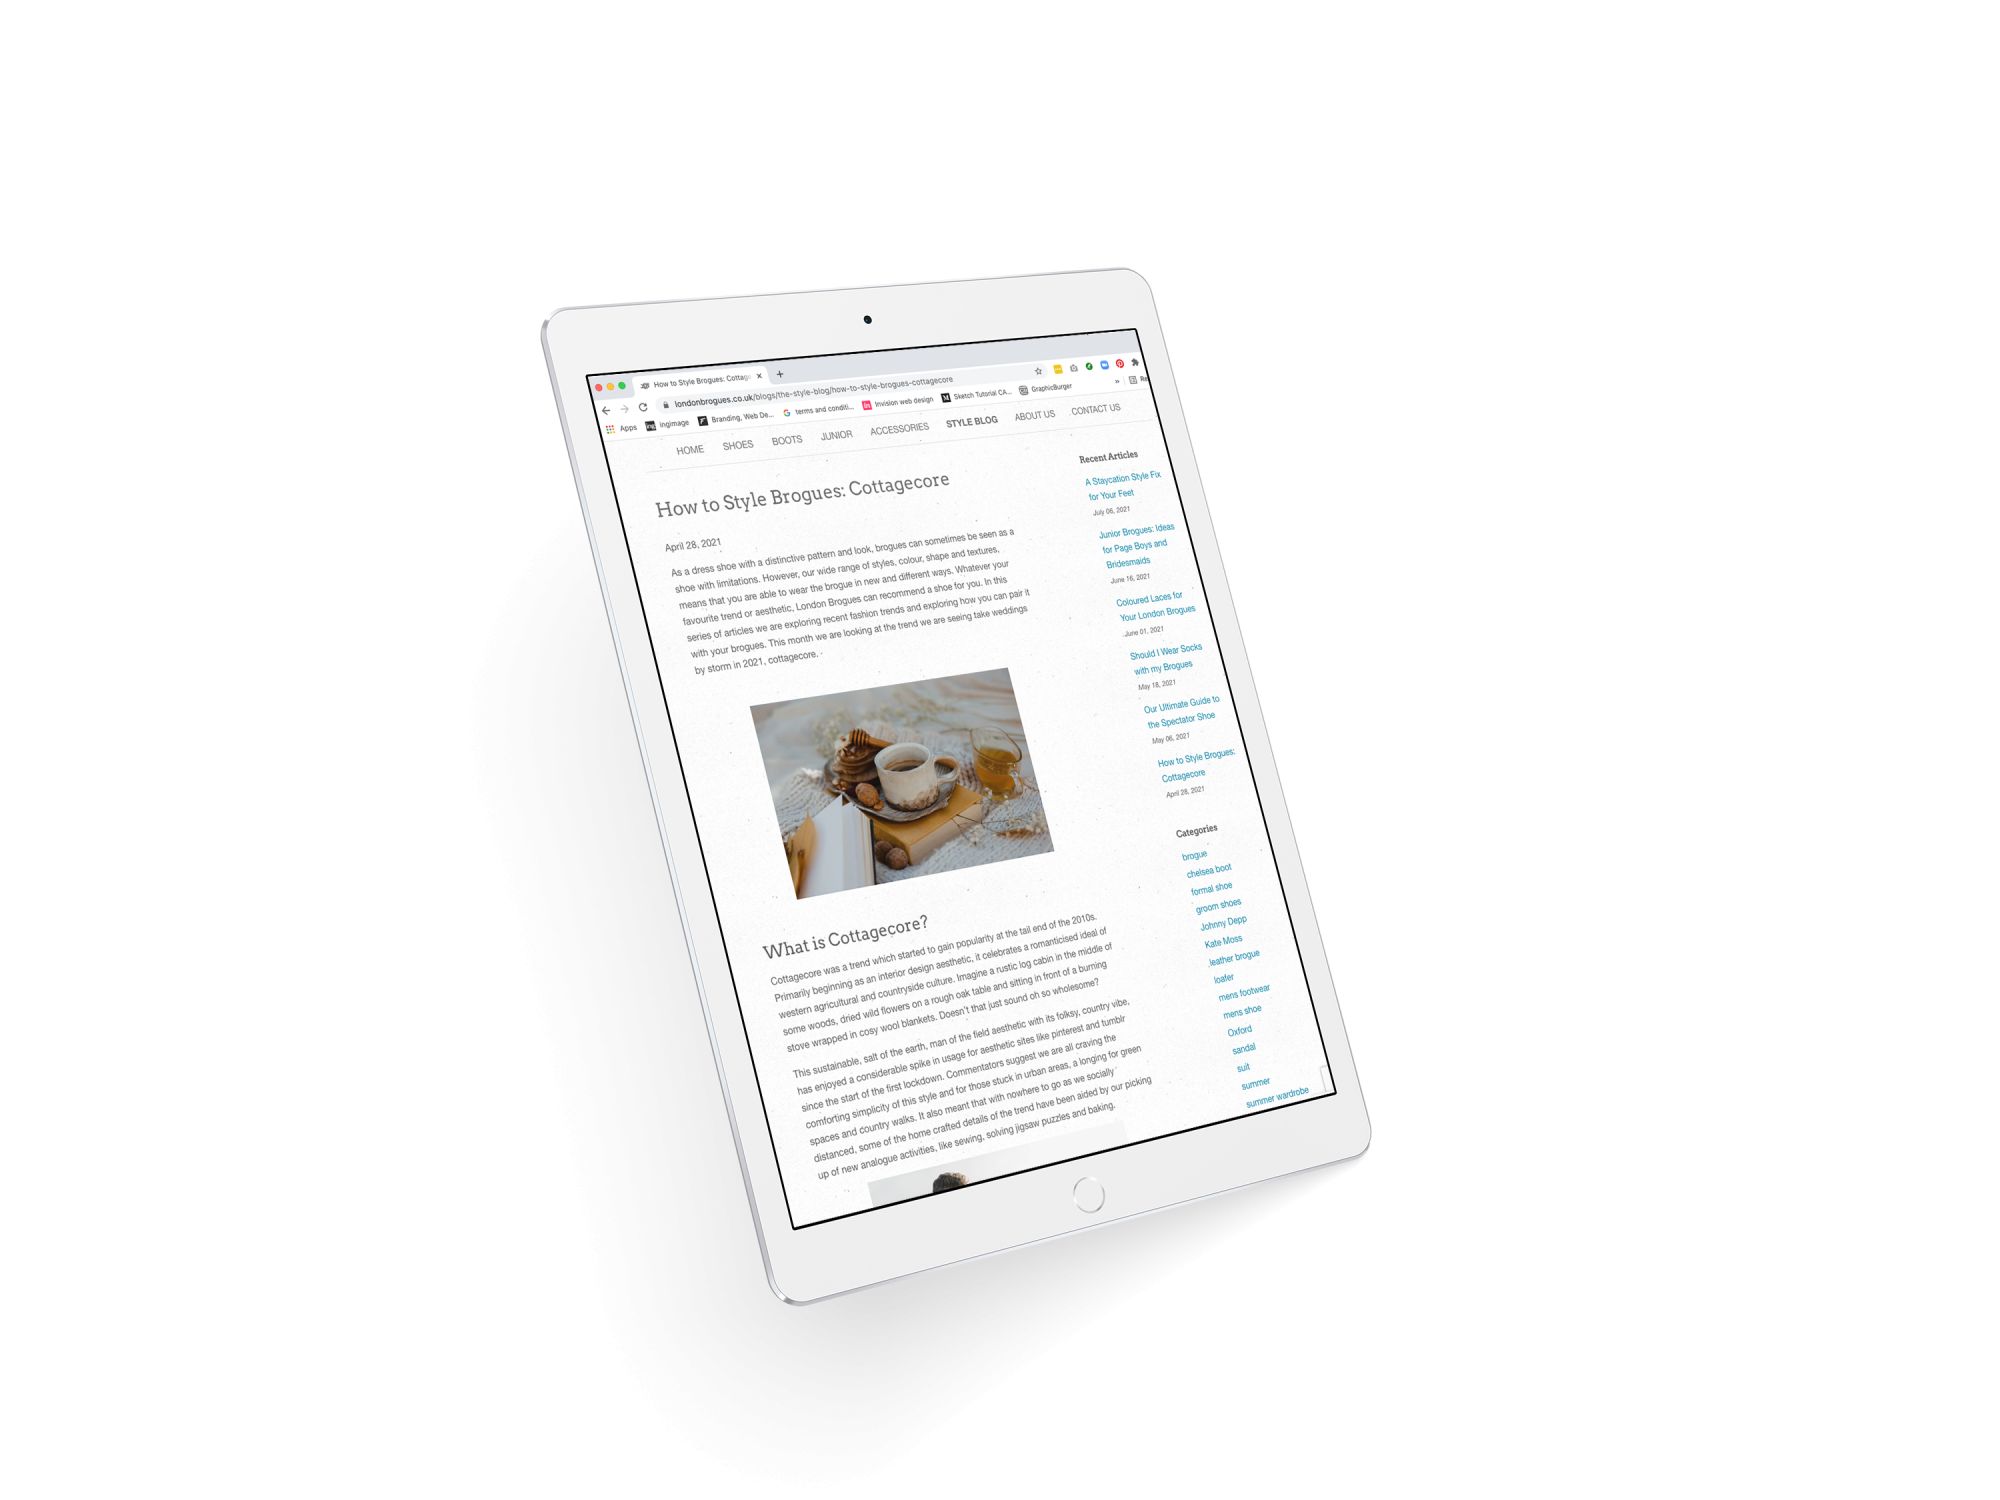 A White Ipad Pro displaying a blog article